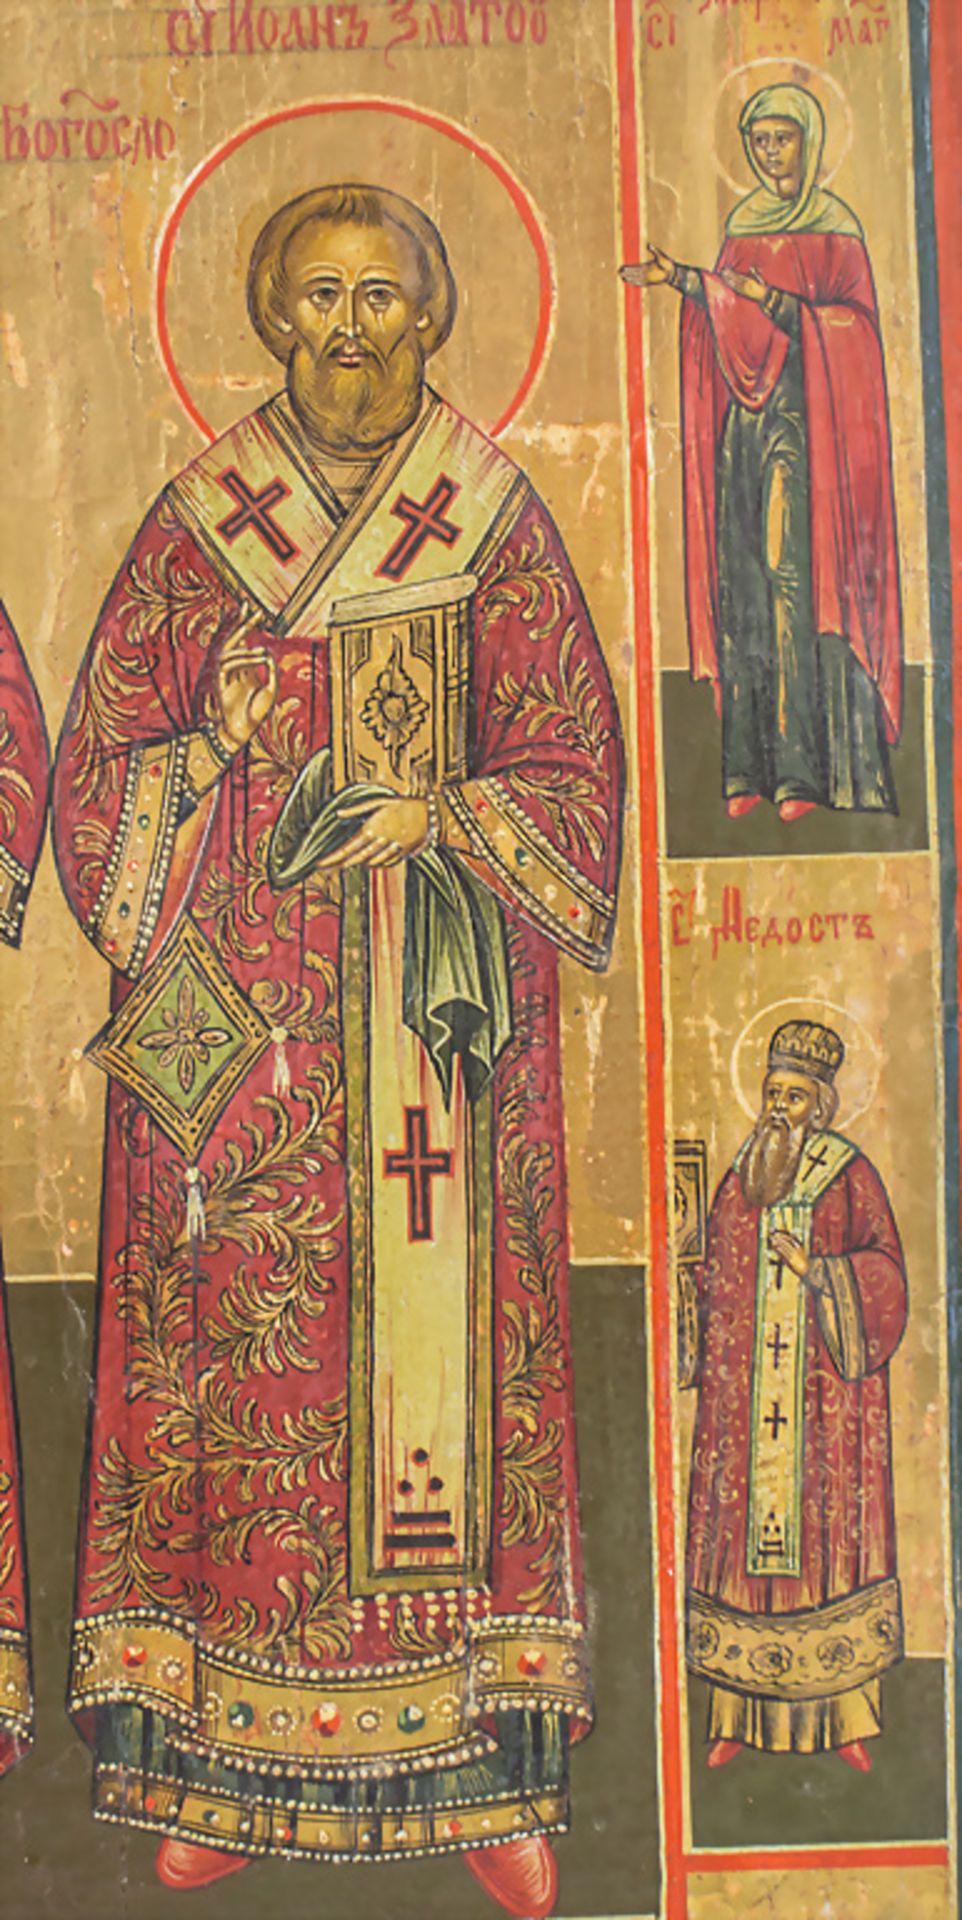 Ikone mit Gottvater und Heiligen / An icon with God Father and Saints, Russland, 19. Jh. - Image 4 of 5